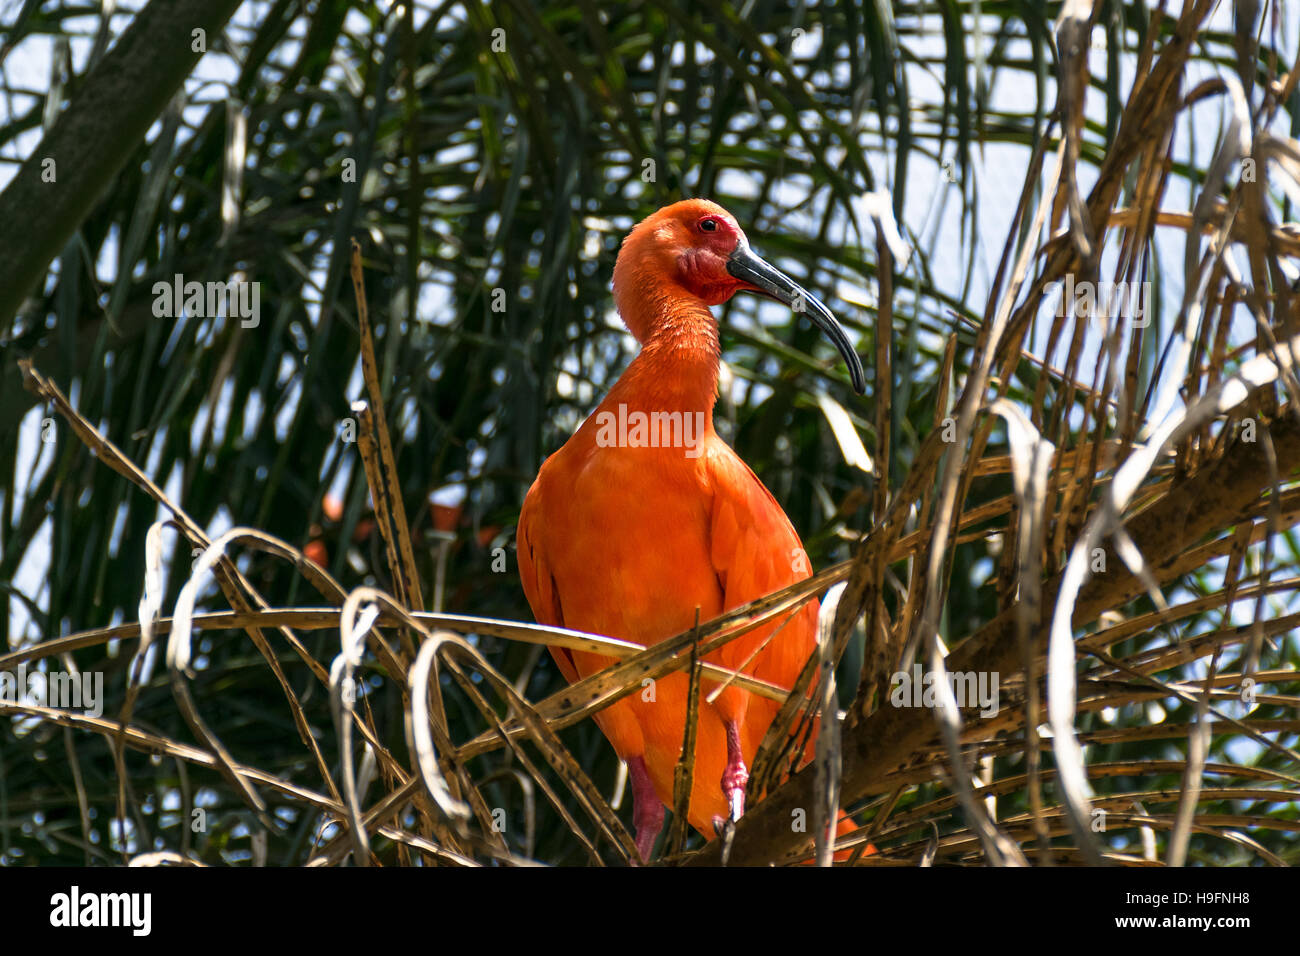 Scarlet ibis (Eudocimus ruber) standing still over a branch Stock Photo